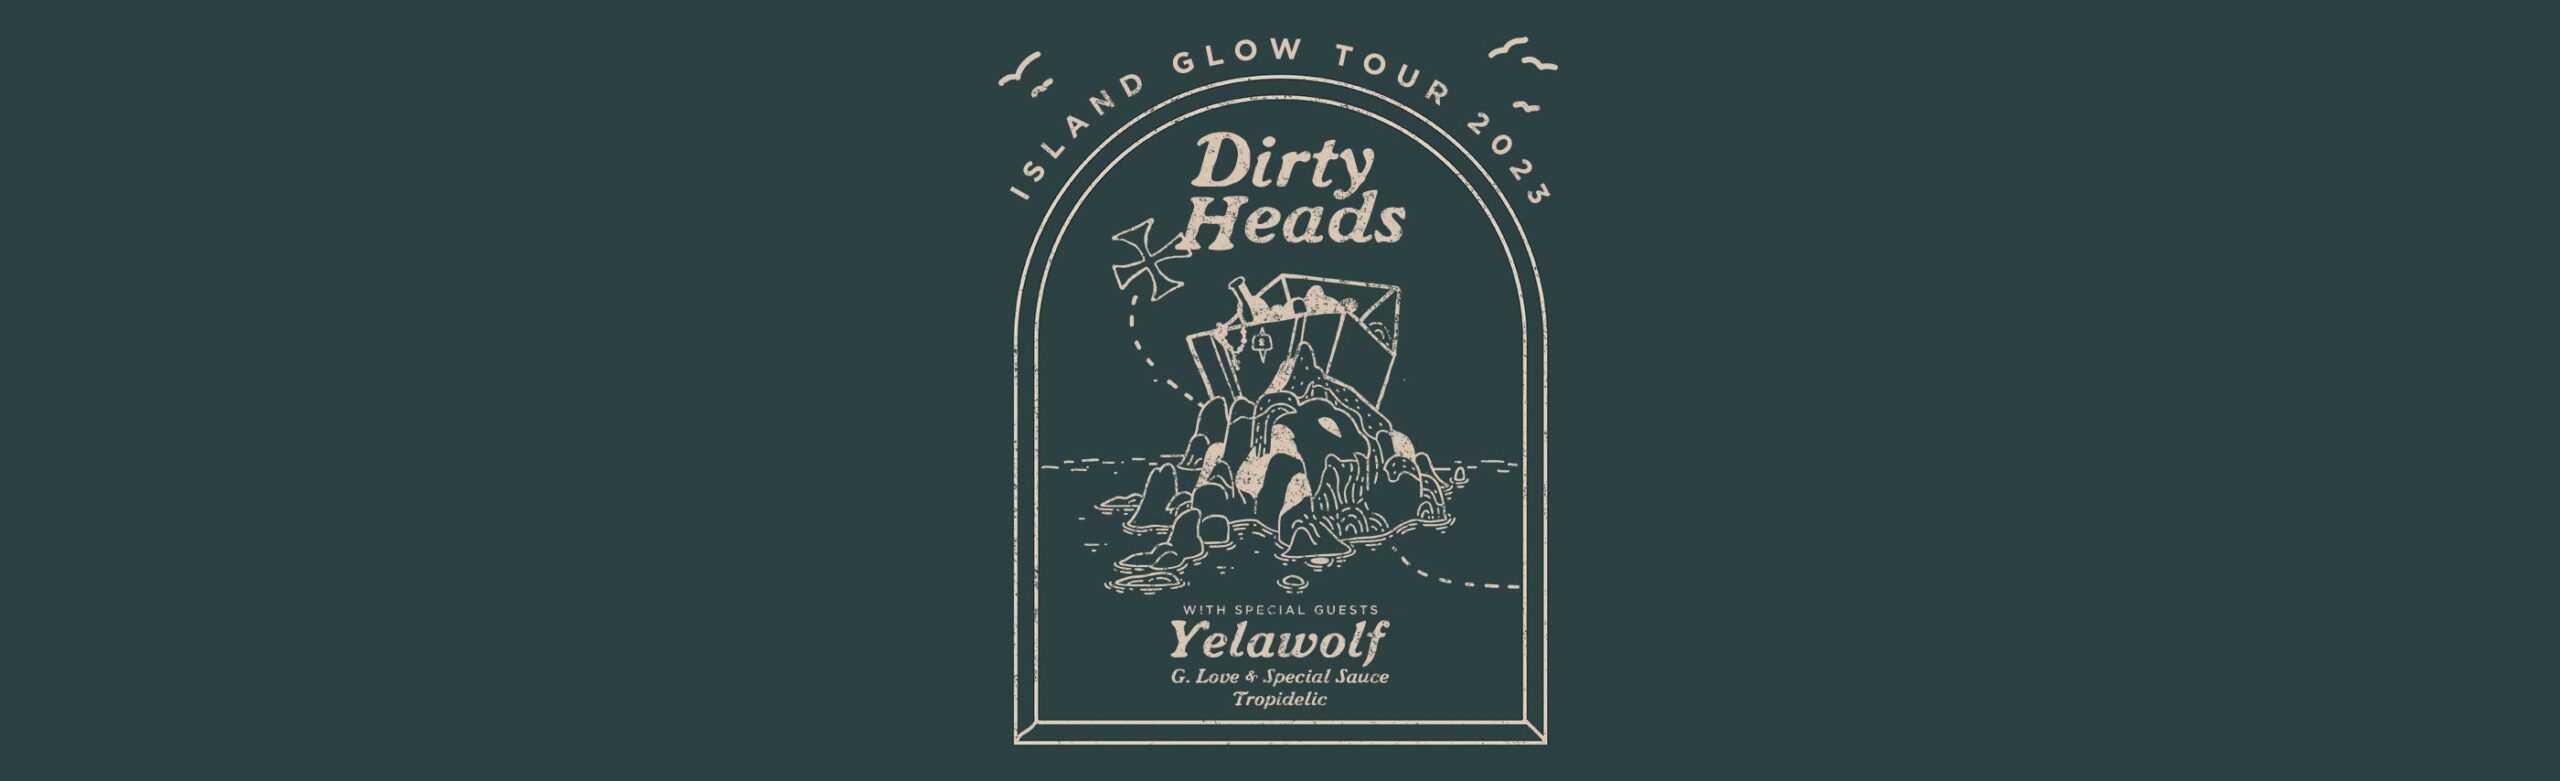 Dirty Heads Announce Island Glow Tour Stop at KettleHouse Amphitheater with Yelawolf, G. Love & Special Sauce and Tropidelic Image